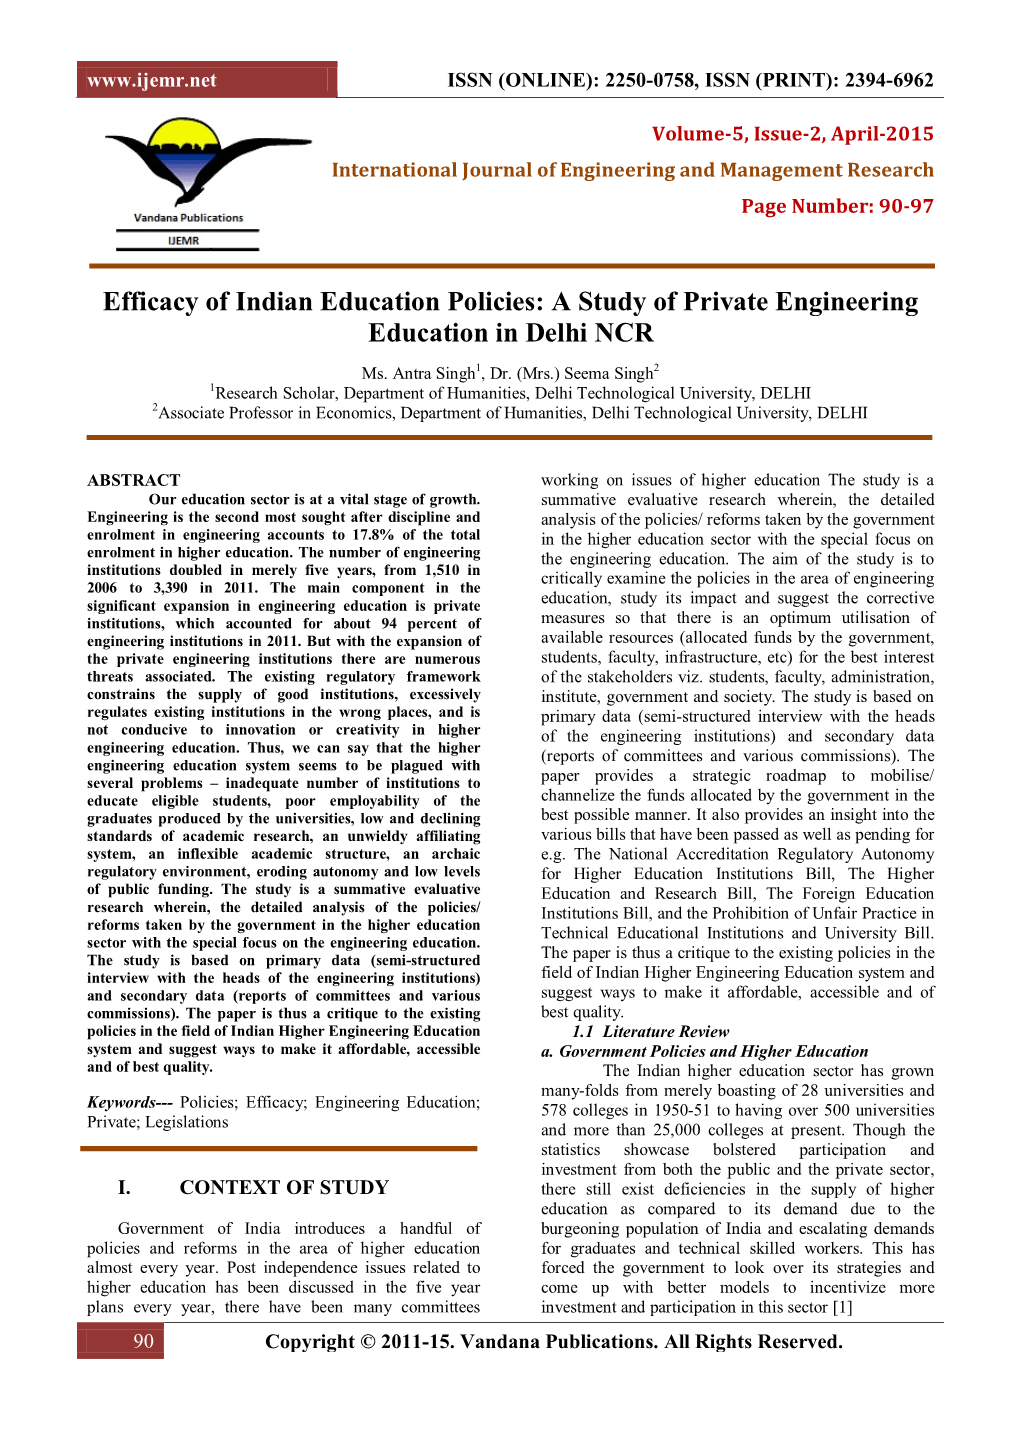 Efficacy of Indian Education Policies: a Study of Private Engineering Education in Delhi NCR